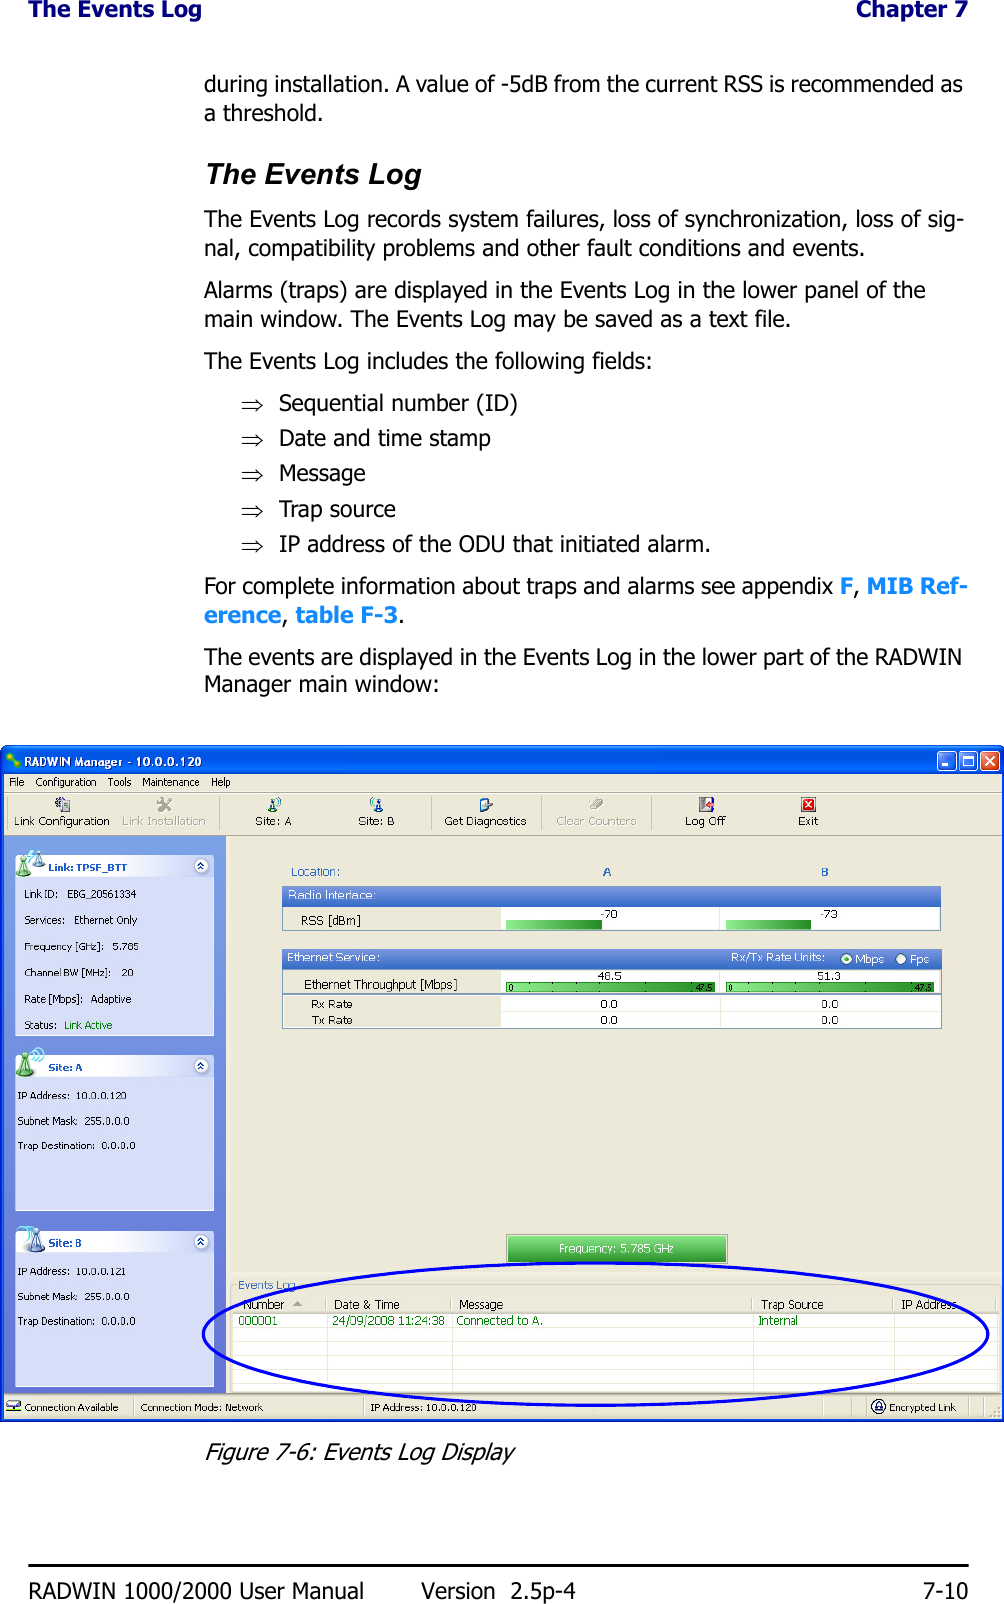 The Events Log  Chapter 7RADWIN 1000/2000 User Manual Version  2.5p-4 7-10during installation. A value of -5dB from the current RSS is recommended as a threshold.The Events LogThe Events Log records system failures, loss of synchronization, loss of sig-nal, compatibility problems and other fault conditions and events.Alarms (traps) are displayed in the Events Log in the lower panel of the main window. The Events Log may be saved as a text file.The Events Log includes the following fields:⇒Sequential number (ID)⇒Date and time stamp⇒Message⇒Trap source⇒IP address of the ODU that initiated alarm.For complete information about traps and alarms see appendix F, MIB Ref-erence, table F-3.The events are displayed in the Events Log in the lower part of the RADWIN Manager main window:Figure 7-6: Events Log Display